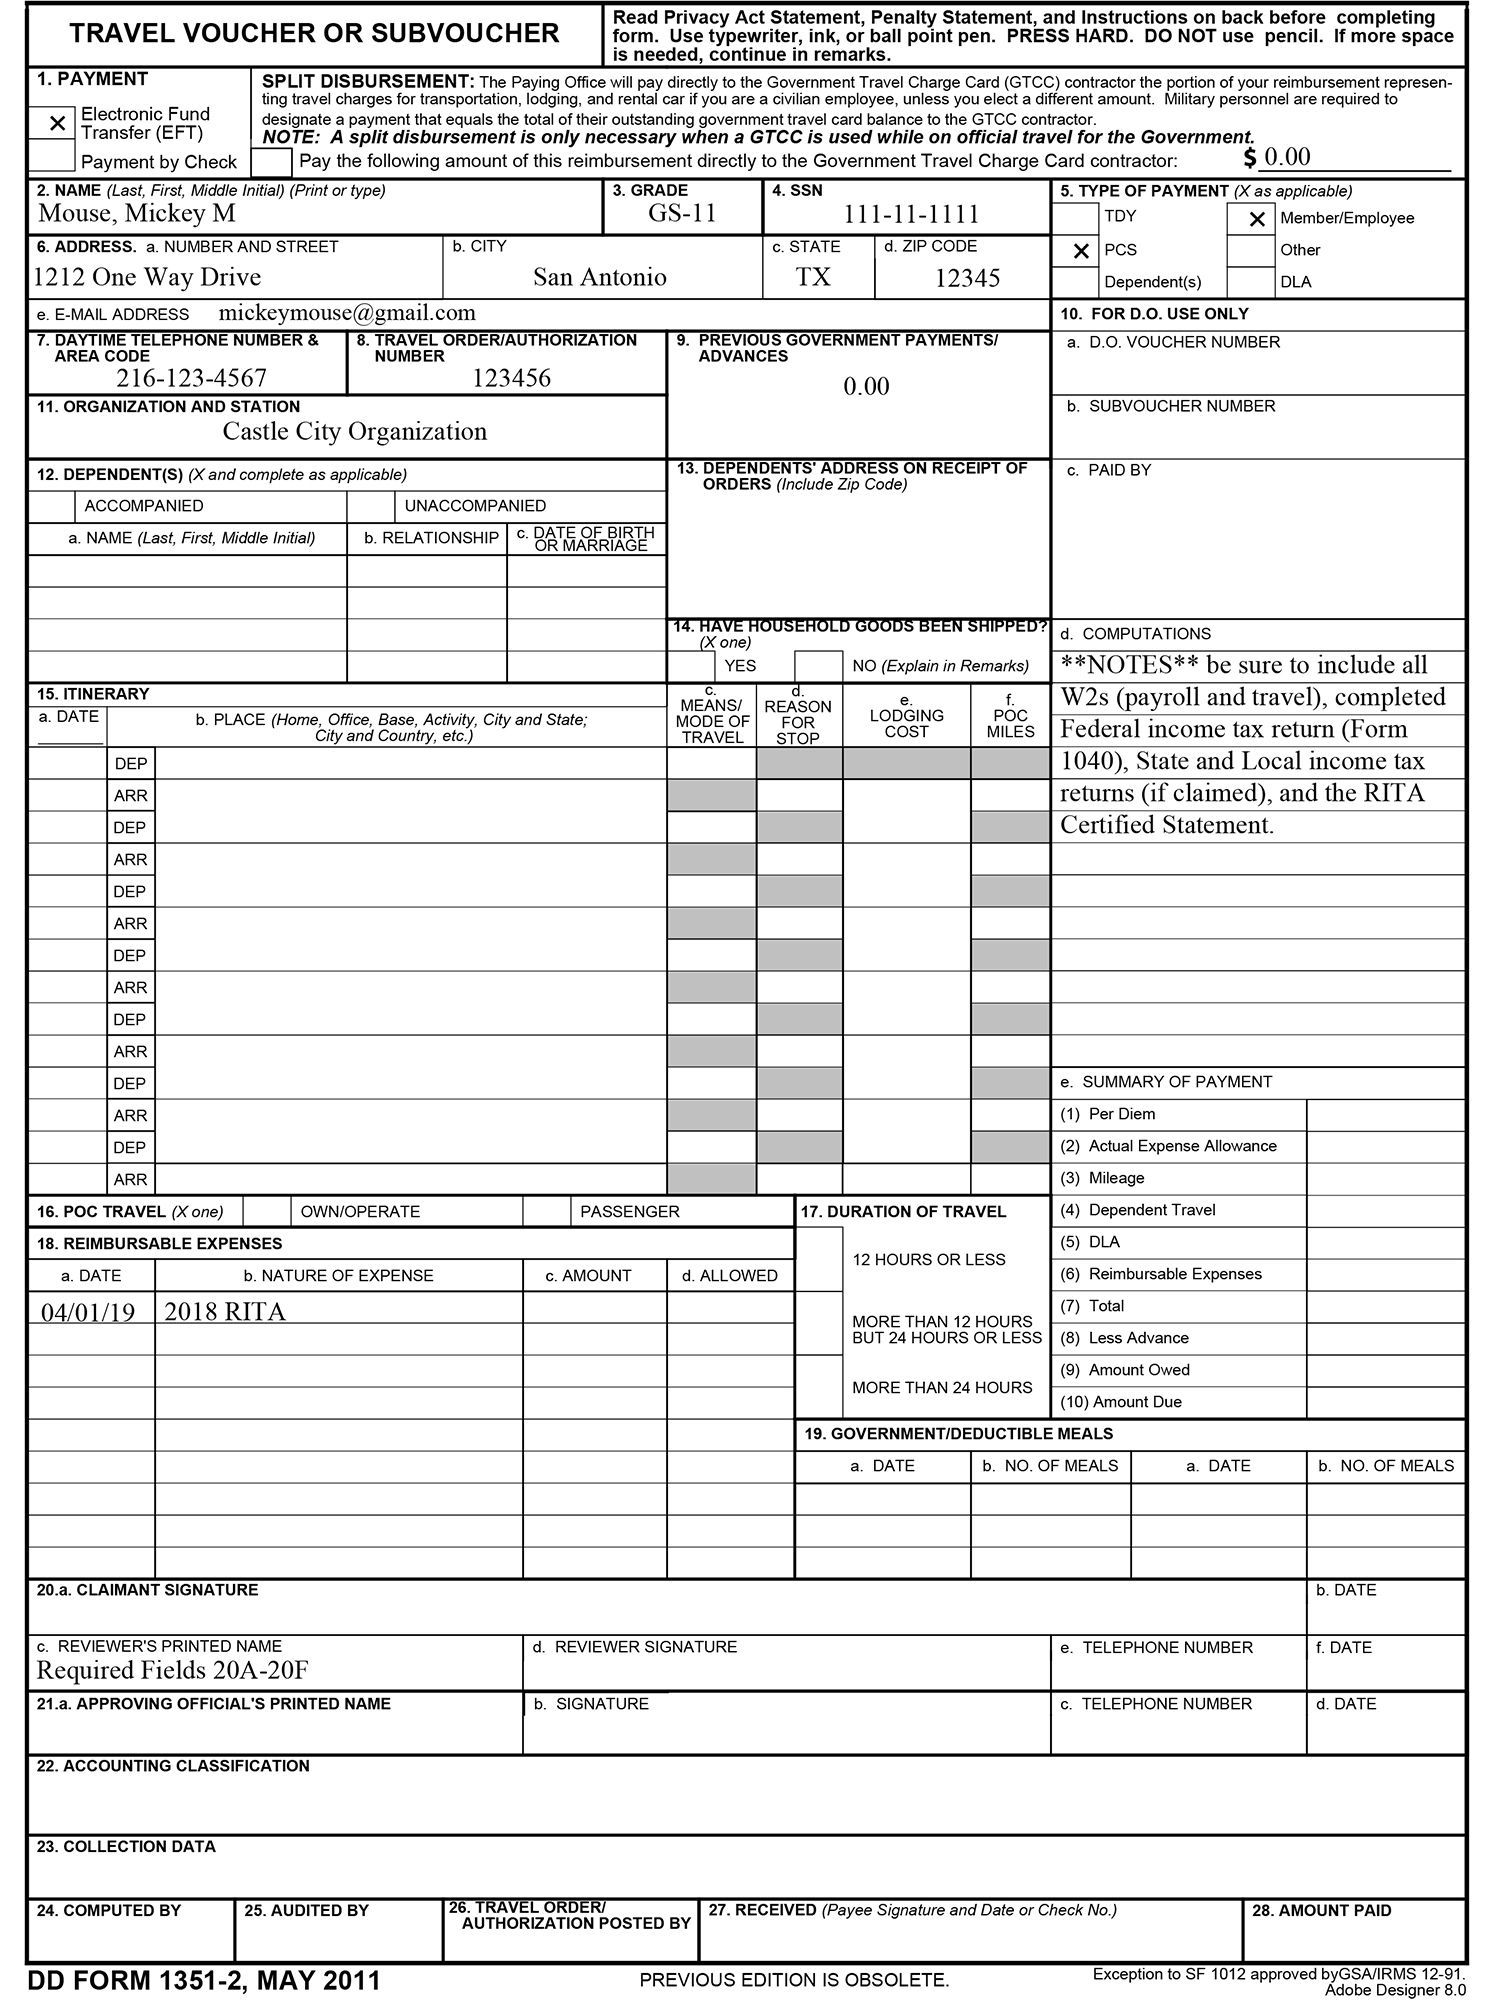 This graphic provides how to fill out the DD1351-2 for a Relocation Income Tax Allowance form